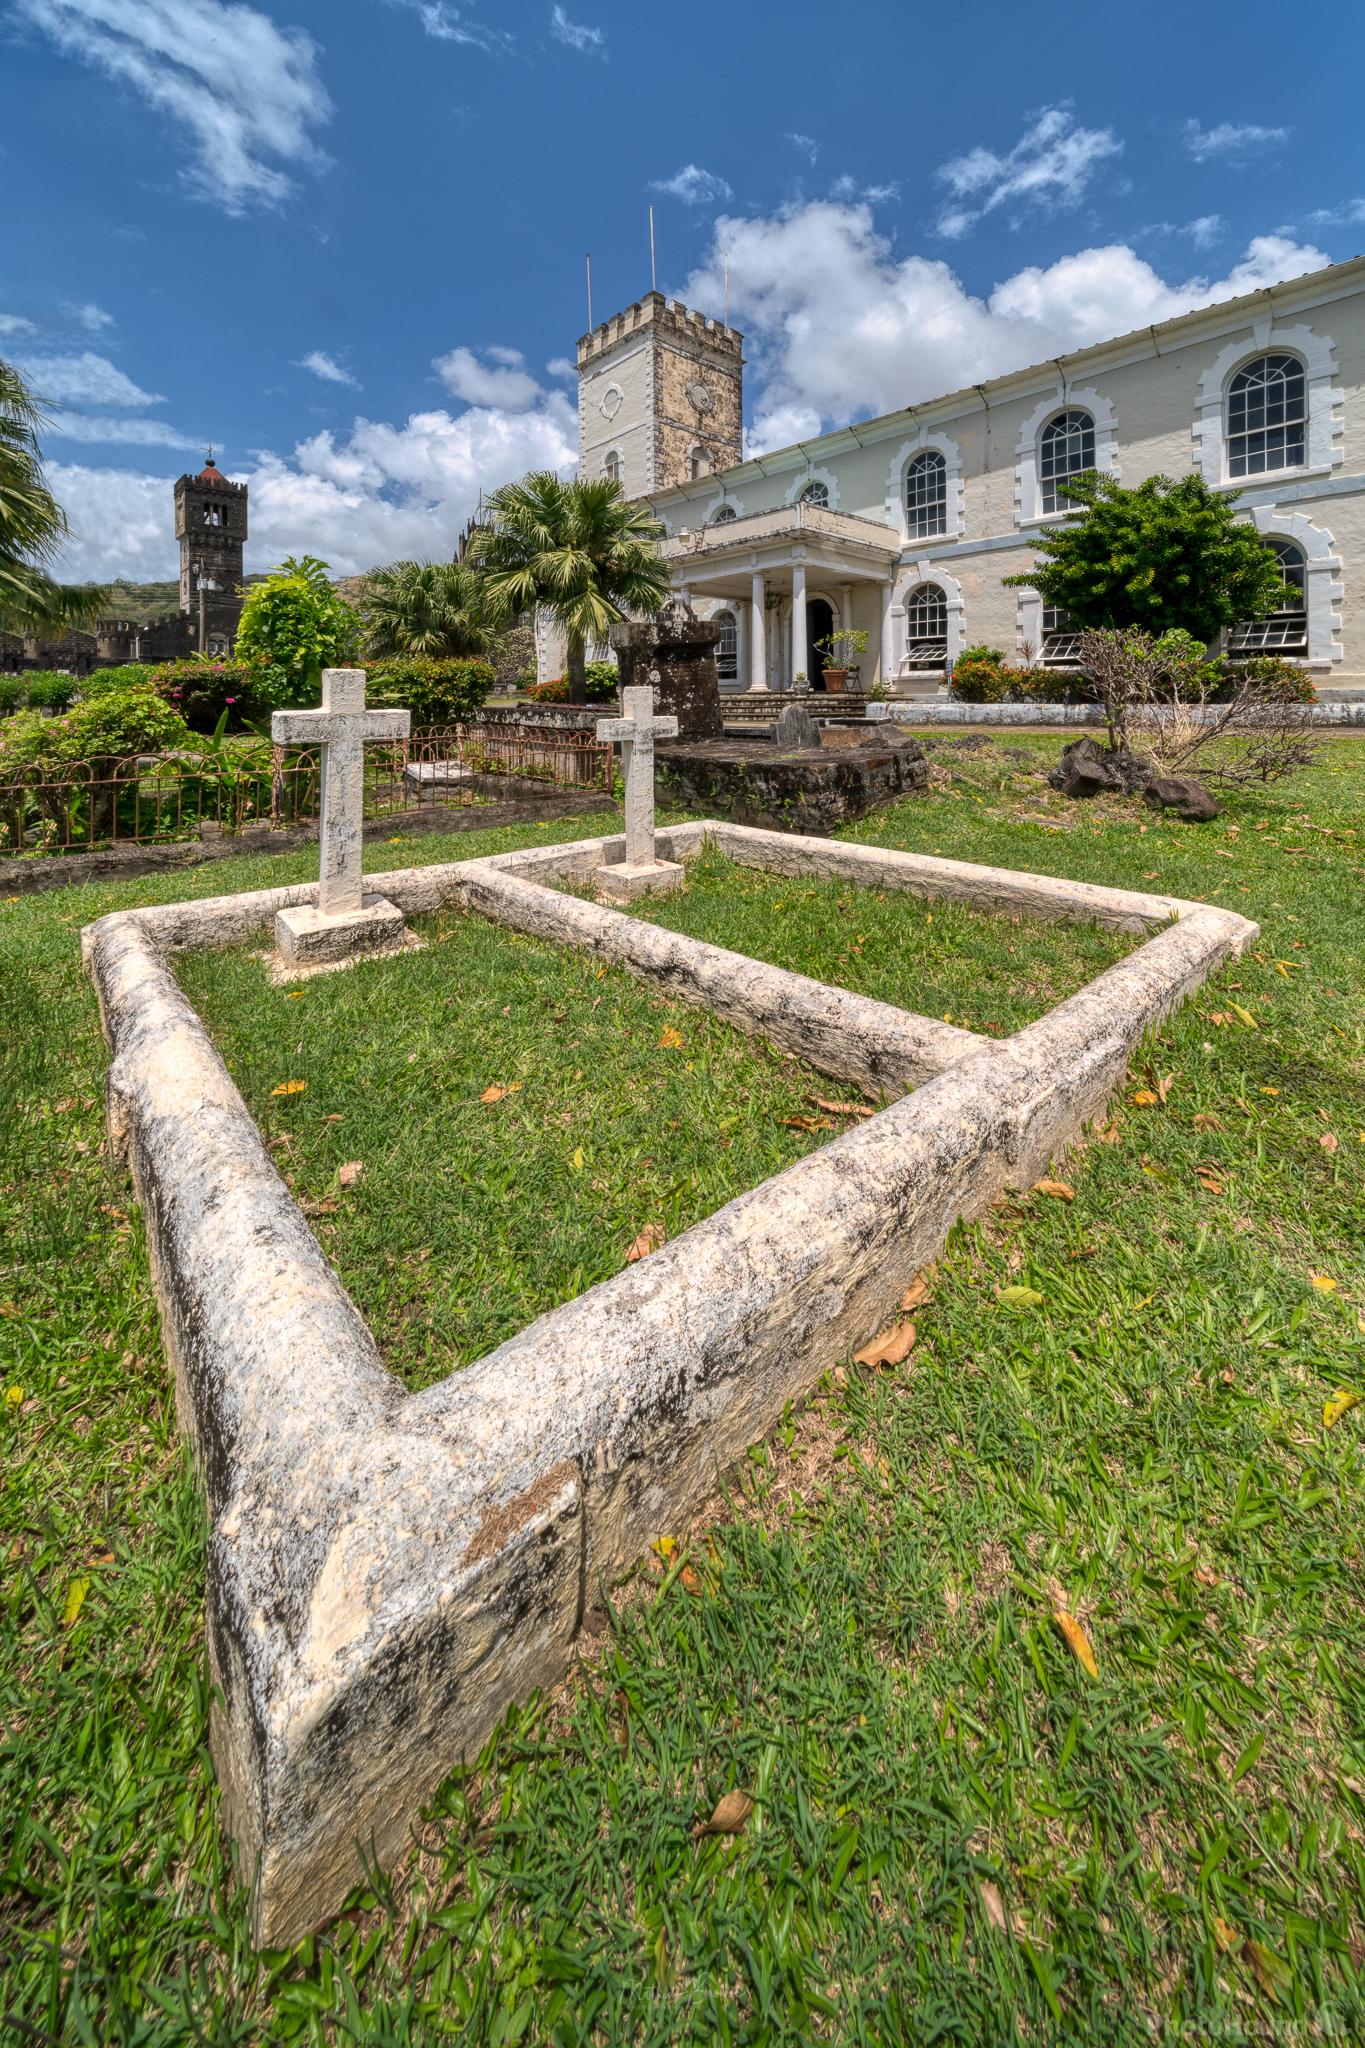 Saint Vincent and the Grenadines photo locations